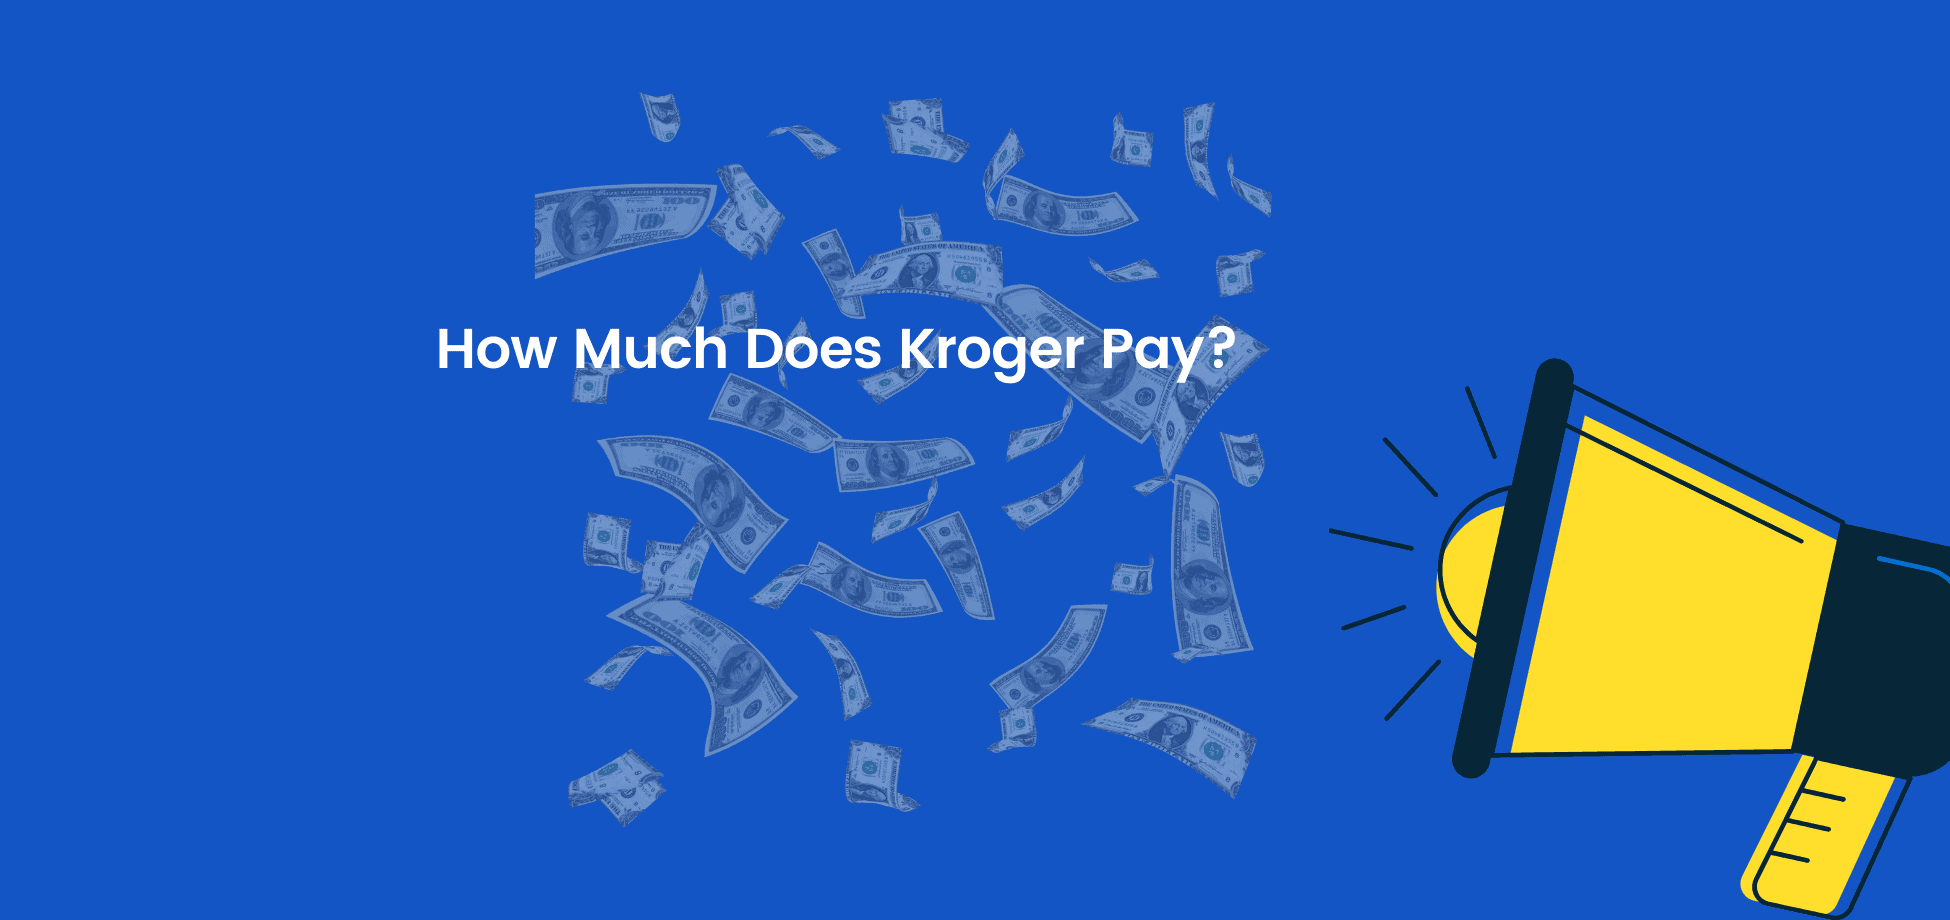 How much does Kroger pay its employees?